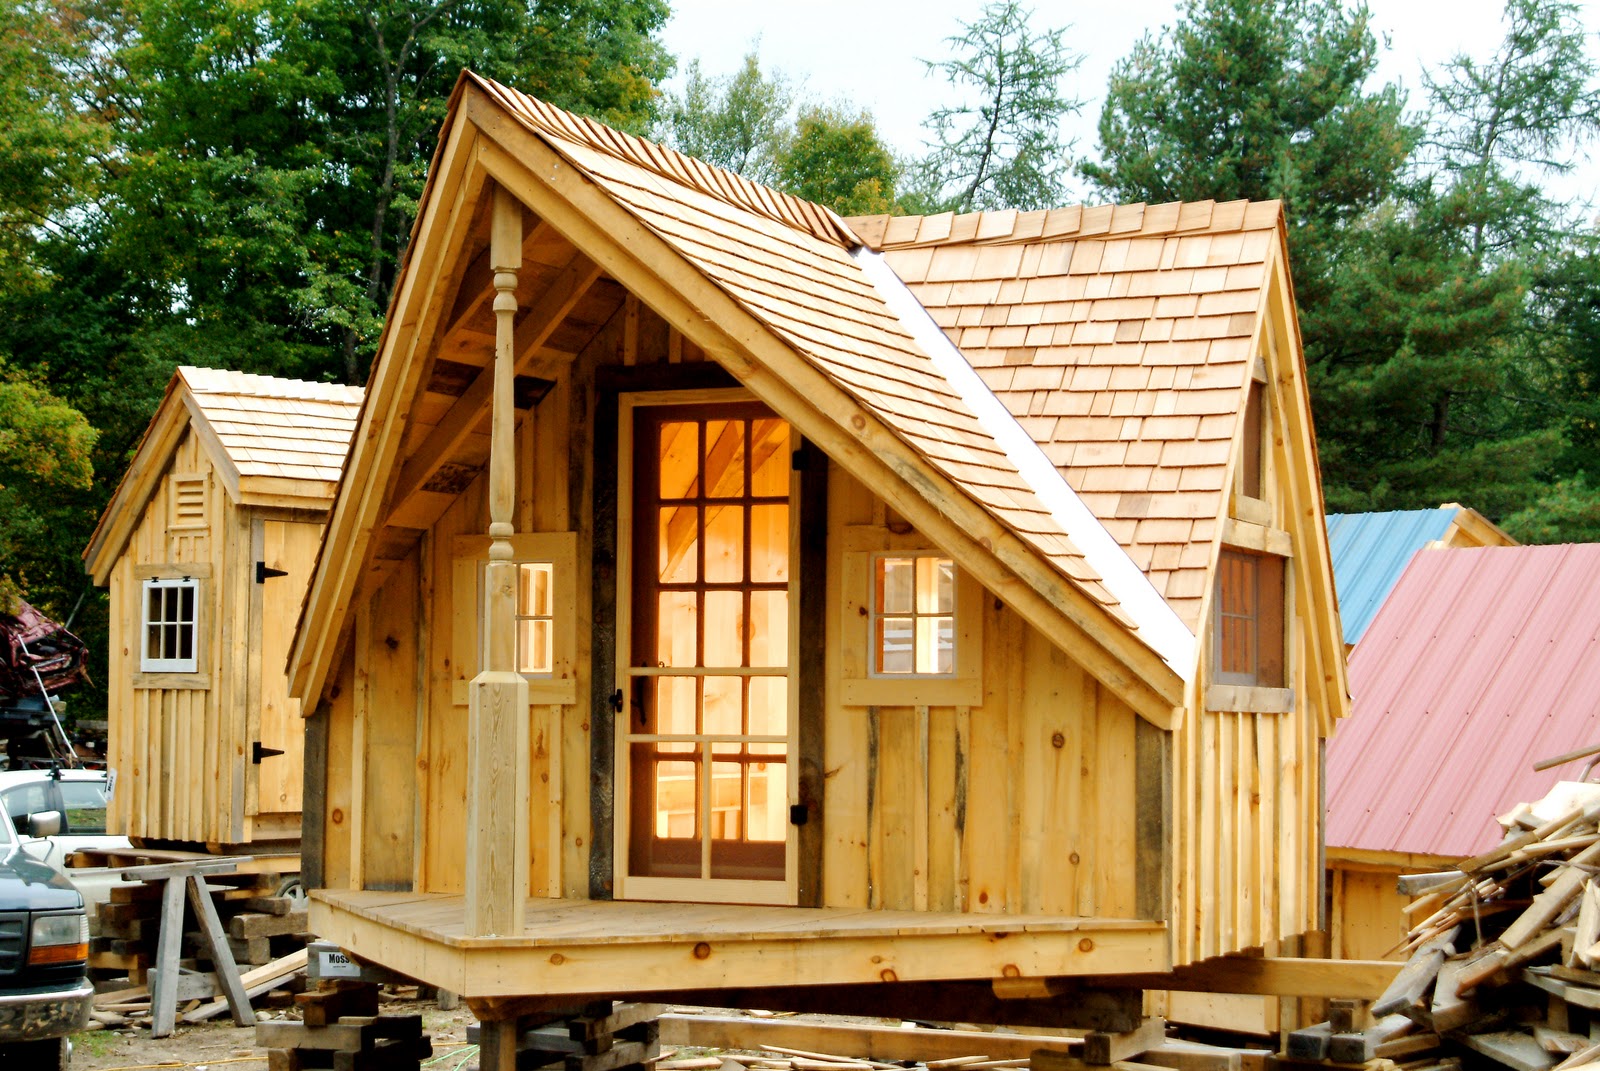 Relaxshacks.com: SIX FREE PLAN SETS for Tiny Houses/Cabins/Shedworking ...